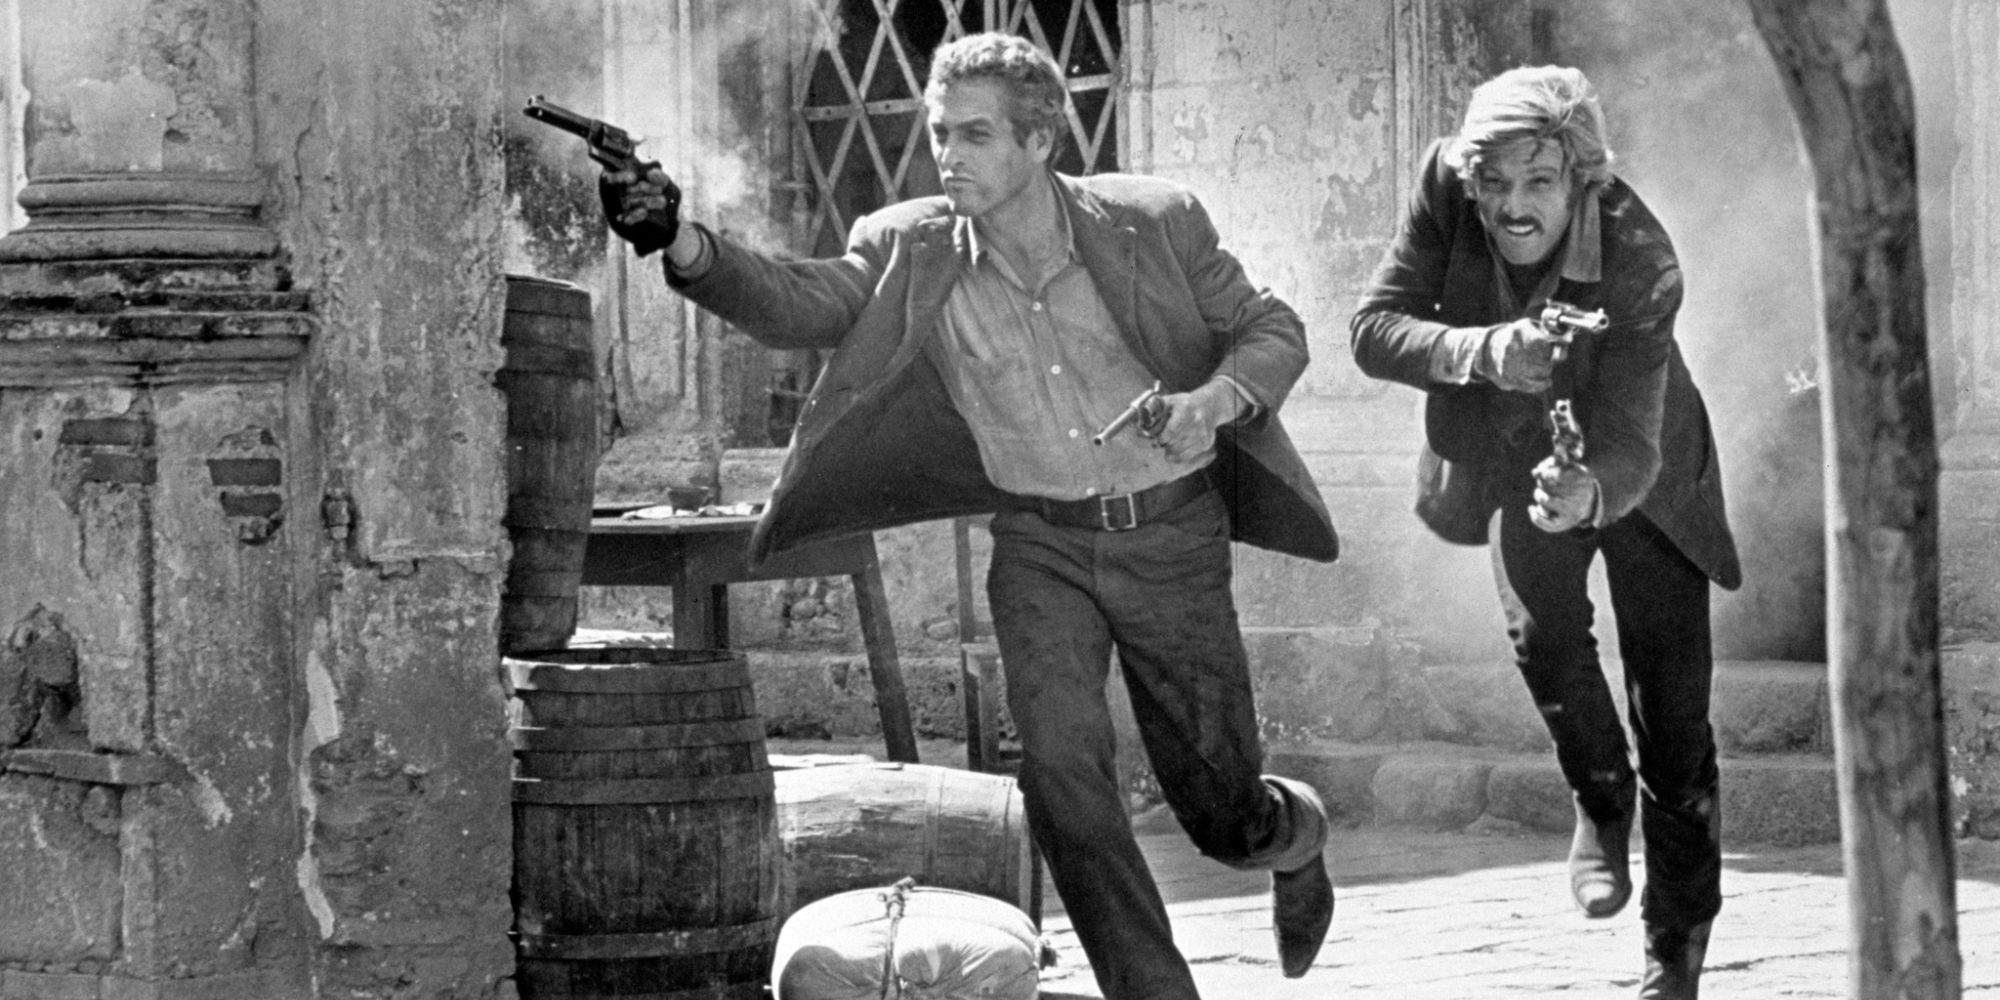 The Ending of Butch Cassidy and the Sundance Kid with Butch Cassidy (Paul Newman) and Sundance Kid (Robert Redford) running and shooting guns in black and white